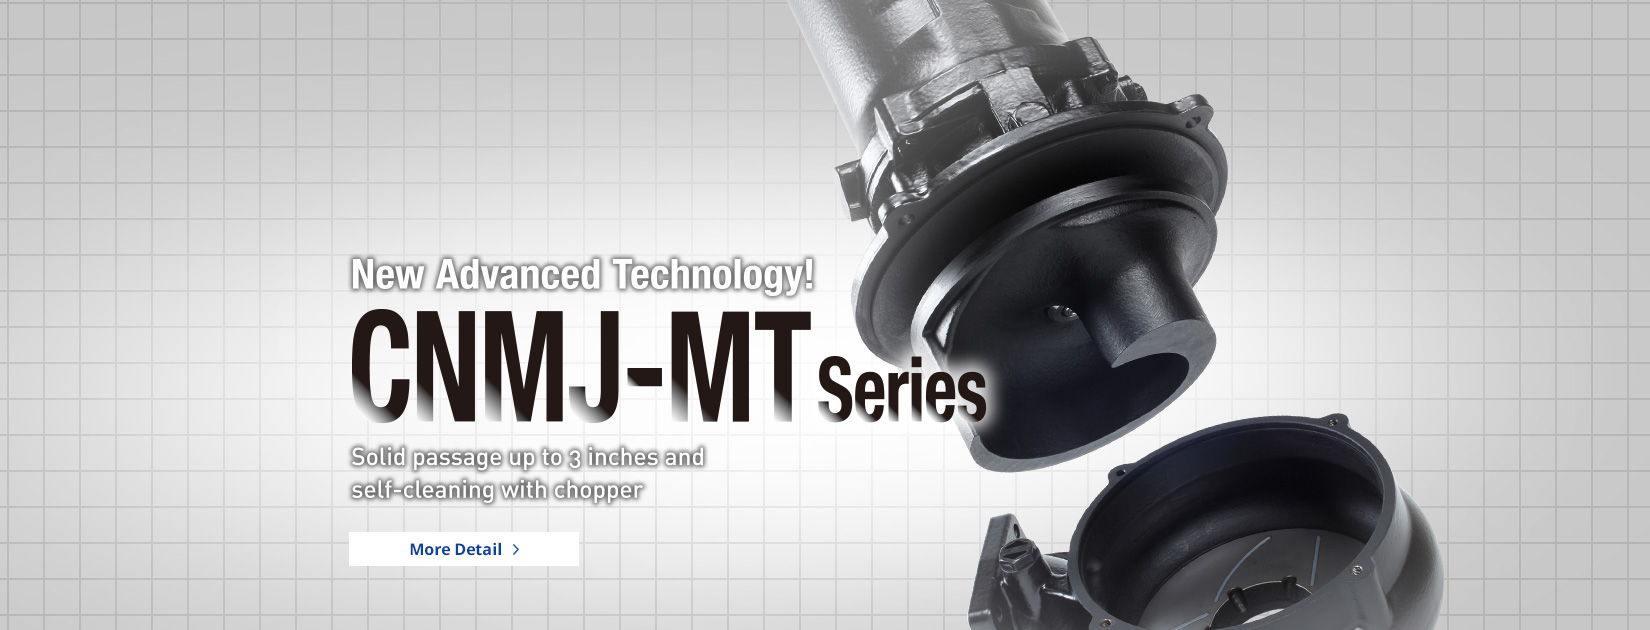 New Advanced Technology! CNMJ Series Solid passage up to 3 inches and self-cleaning with chopper